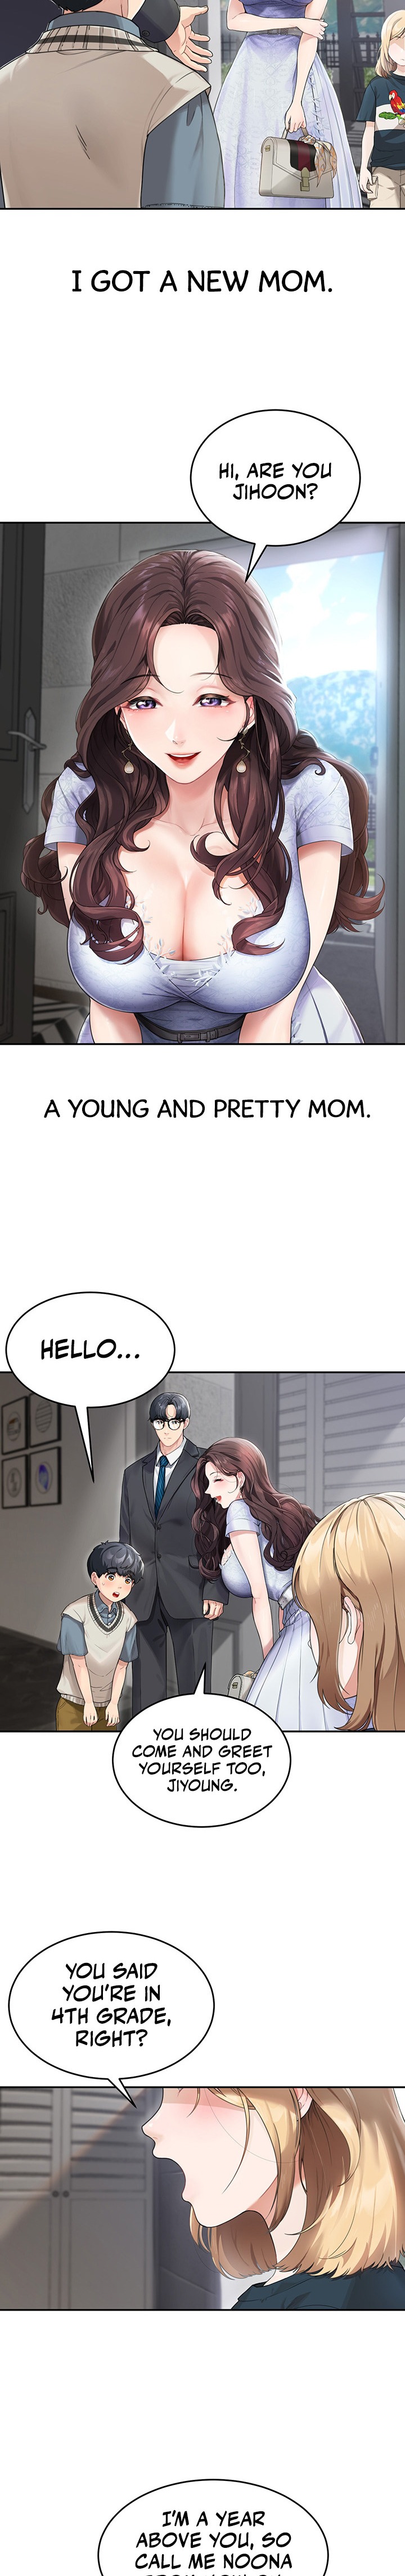 Is It Your Mother or Sister? - Chapter 1 Page 2